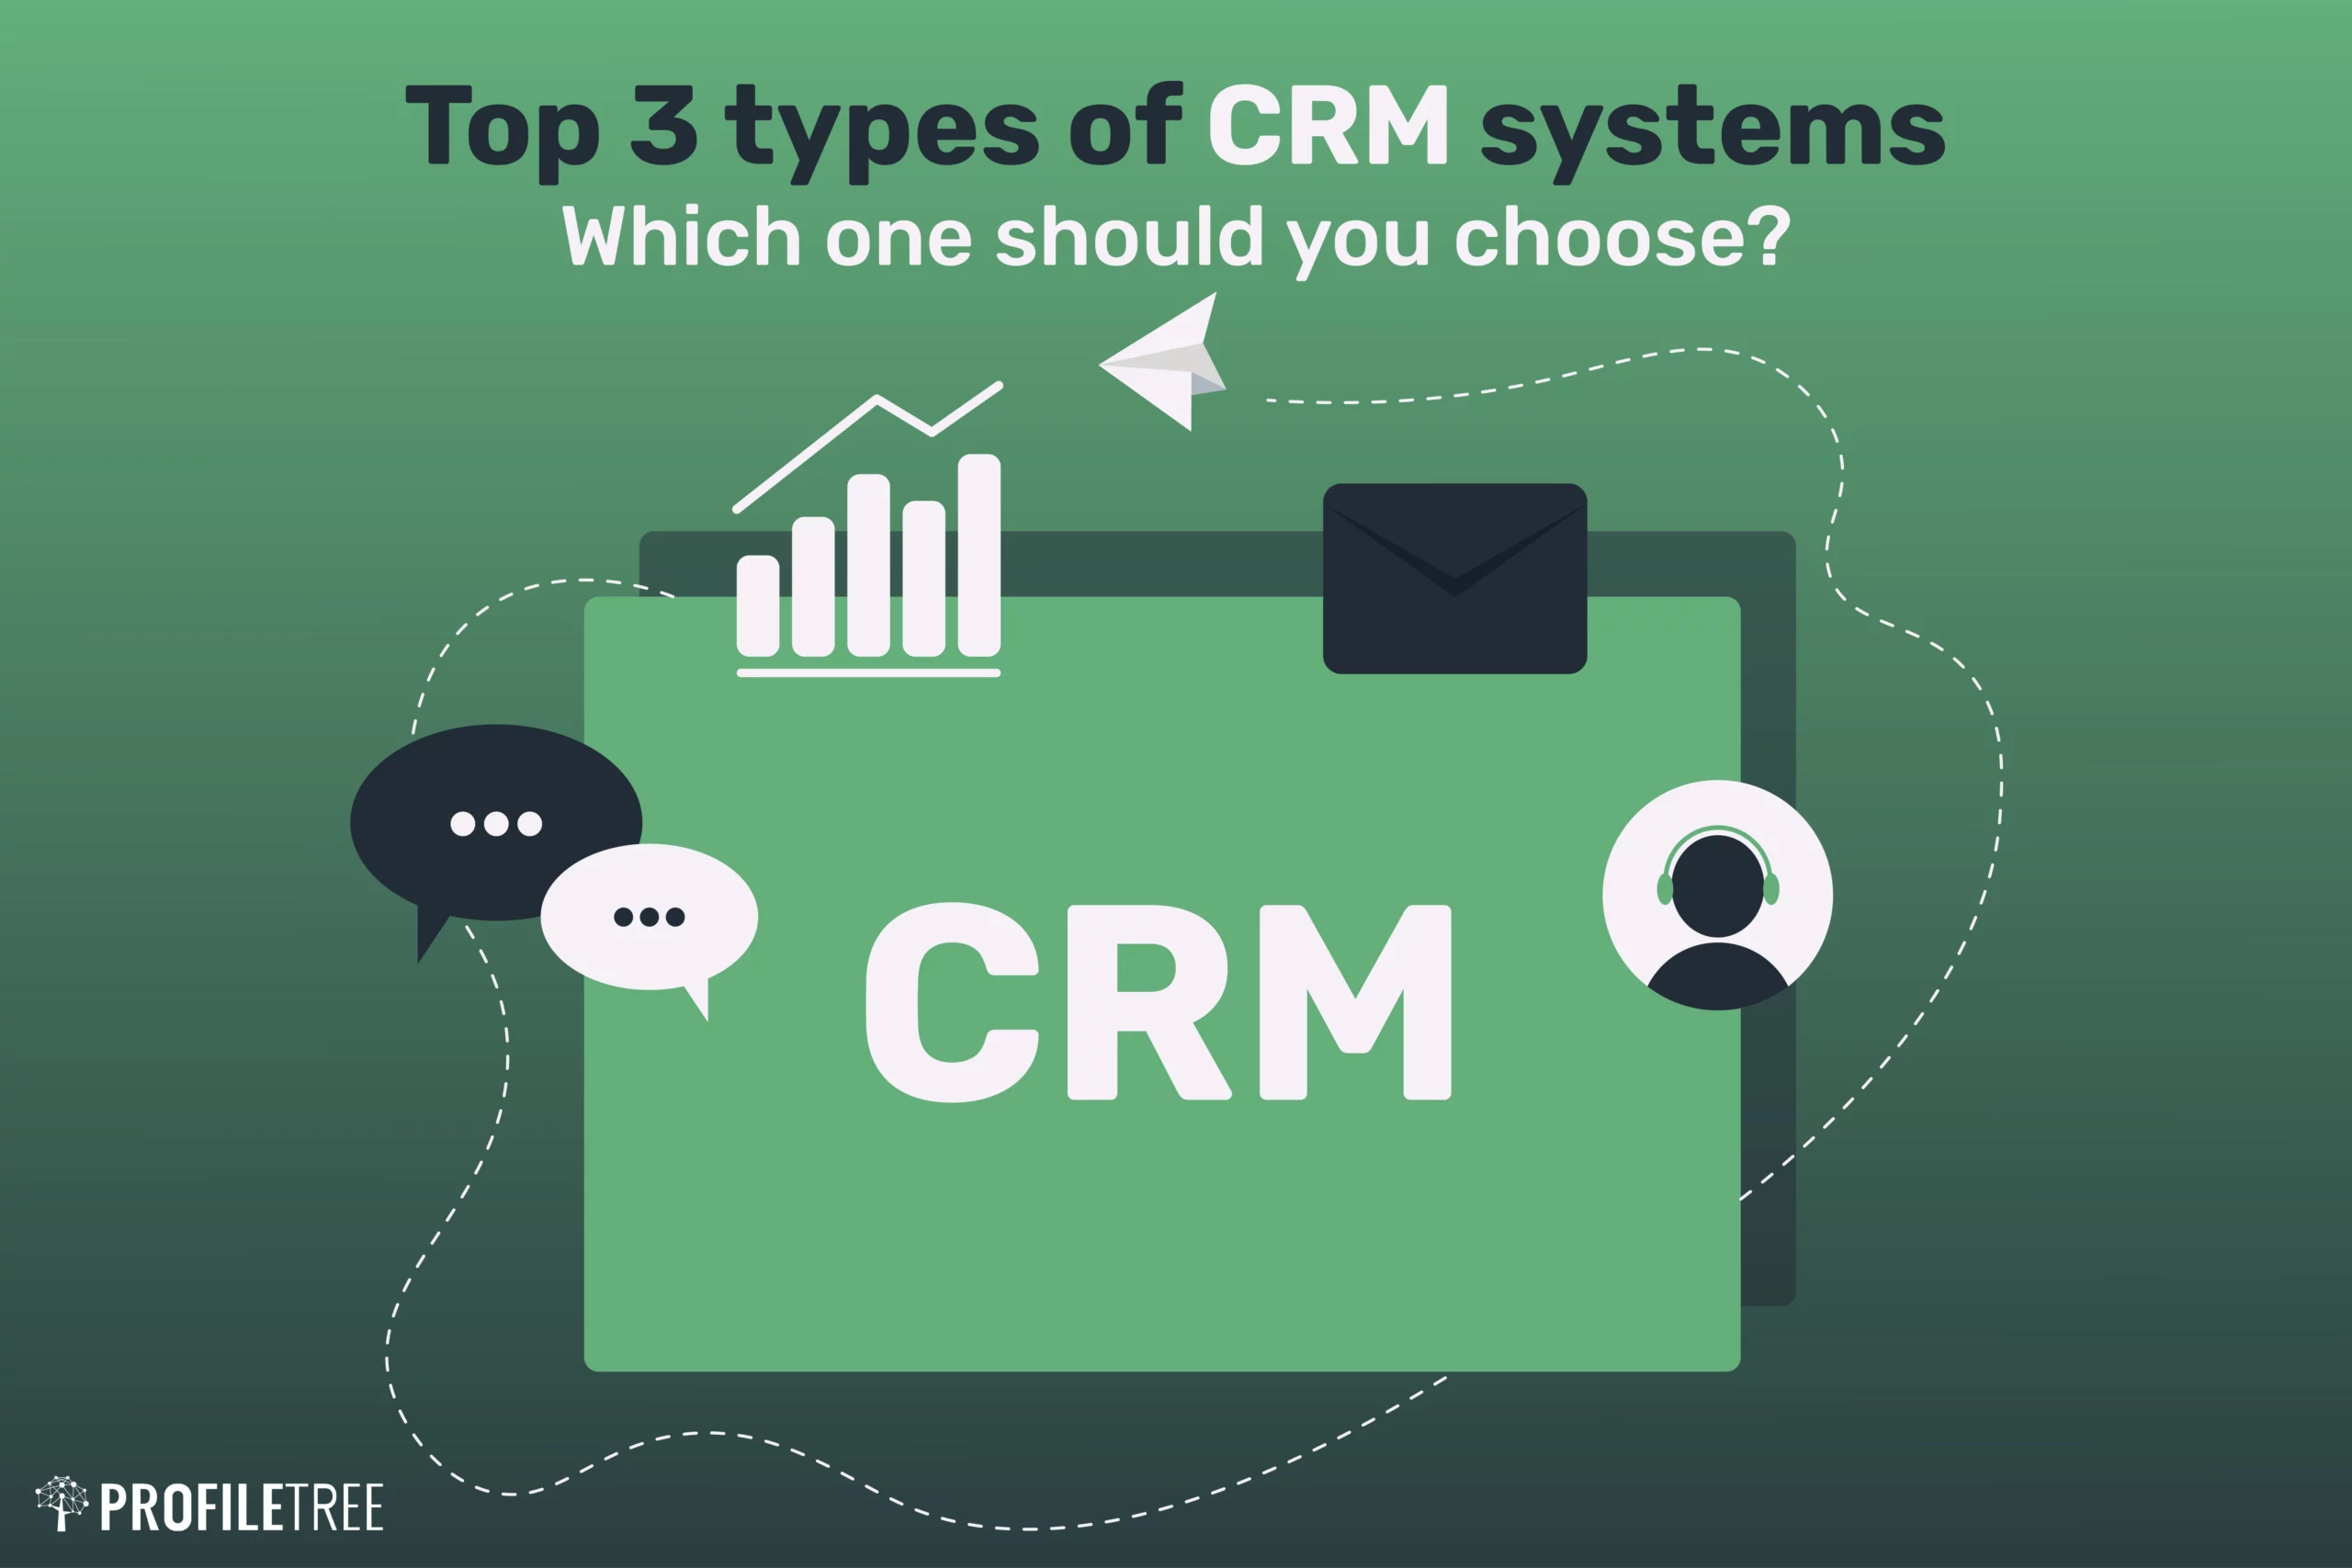 Top 3 types of CRM systems